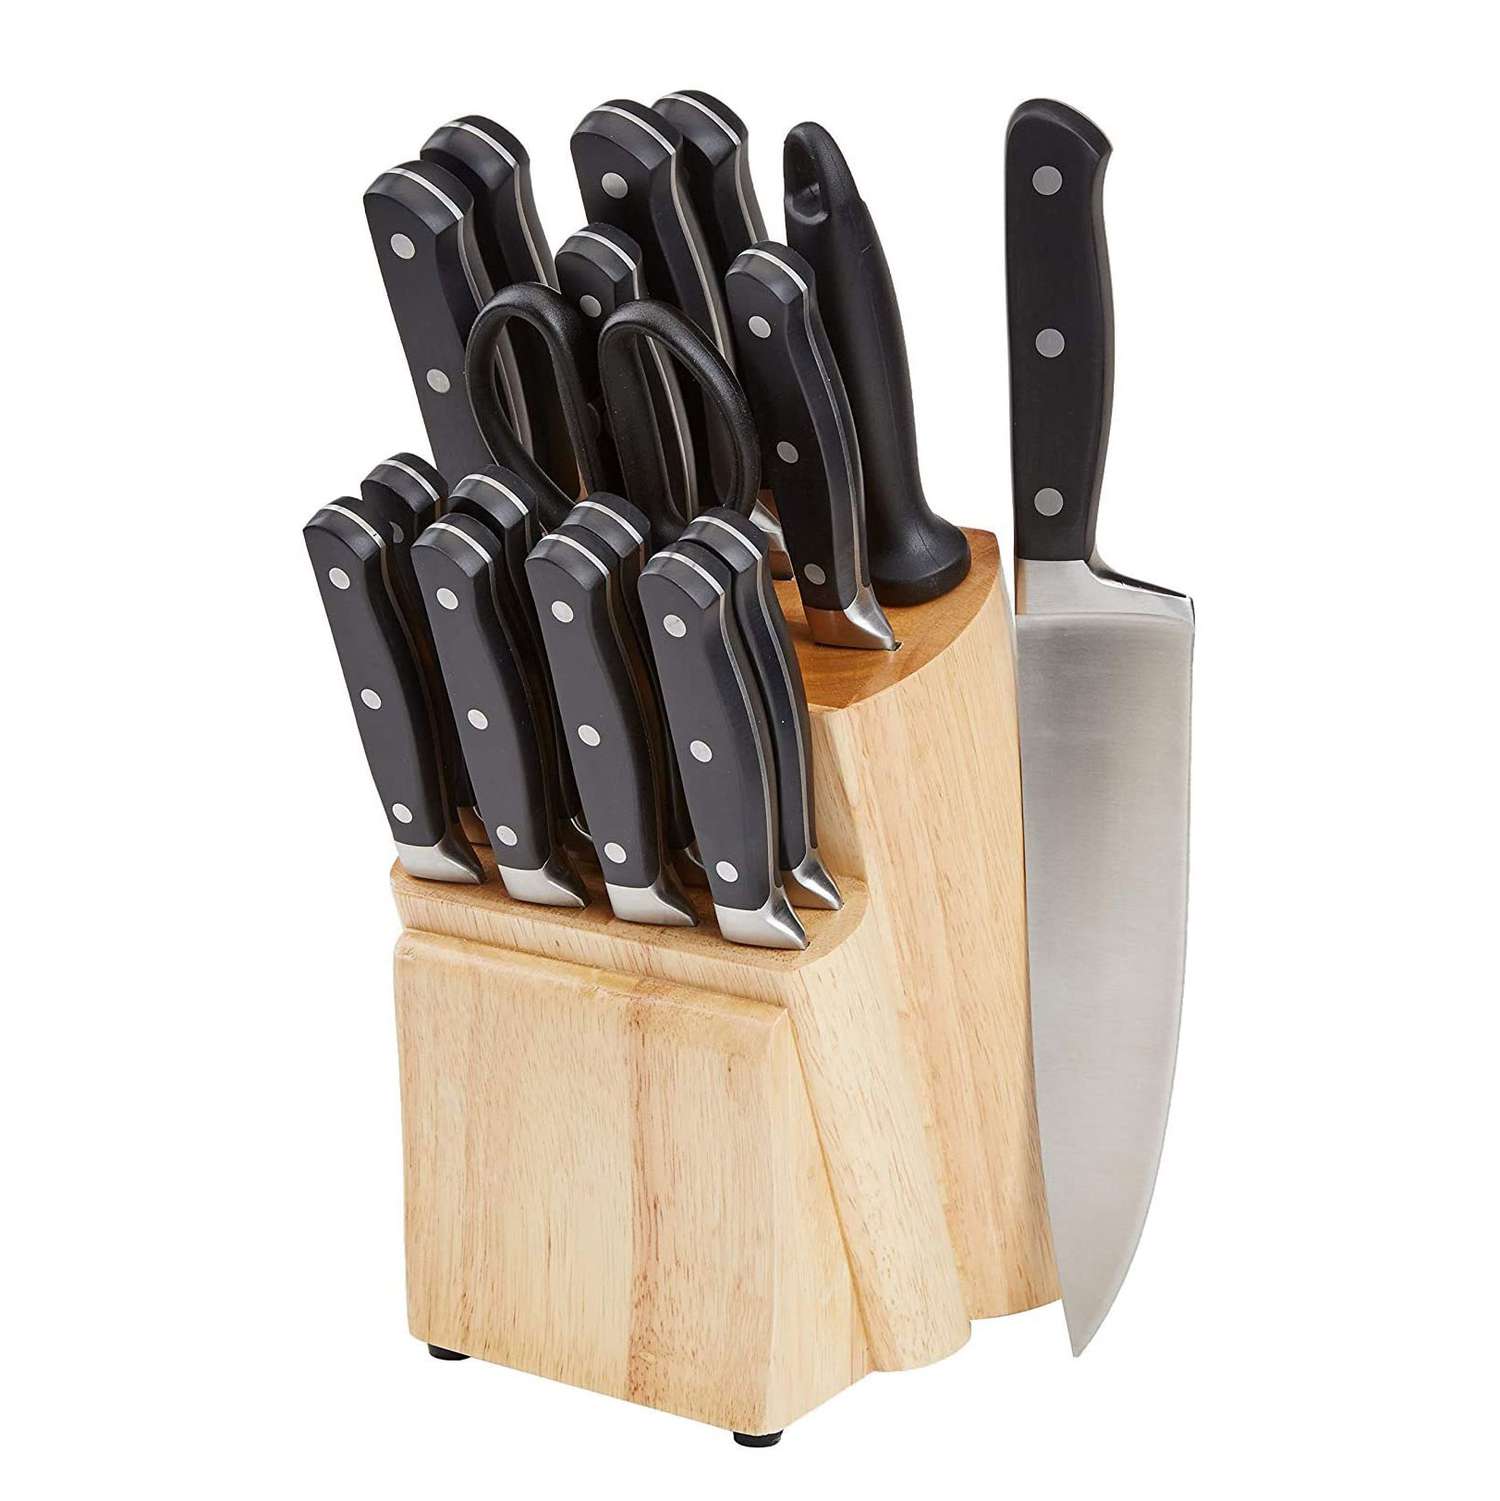 Basic wooden knife block set with chef's knife on display